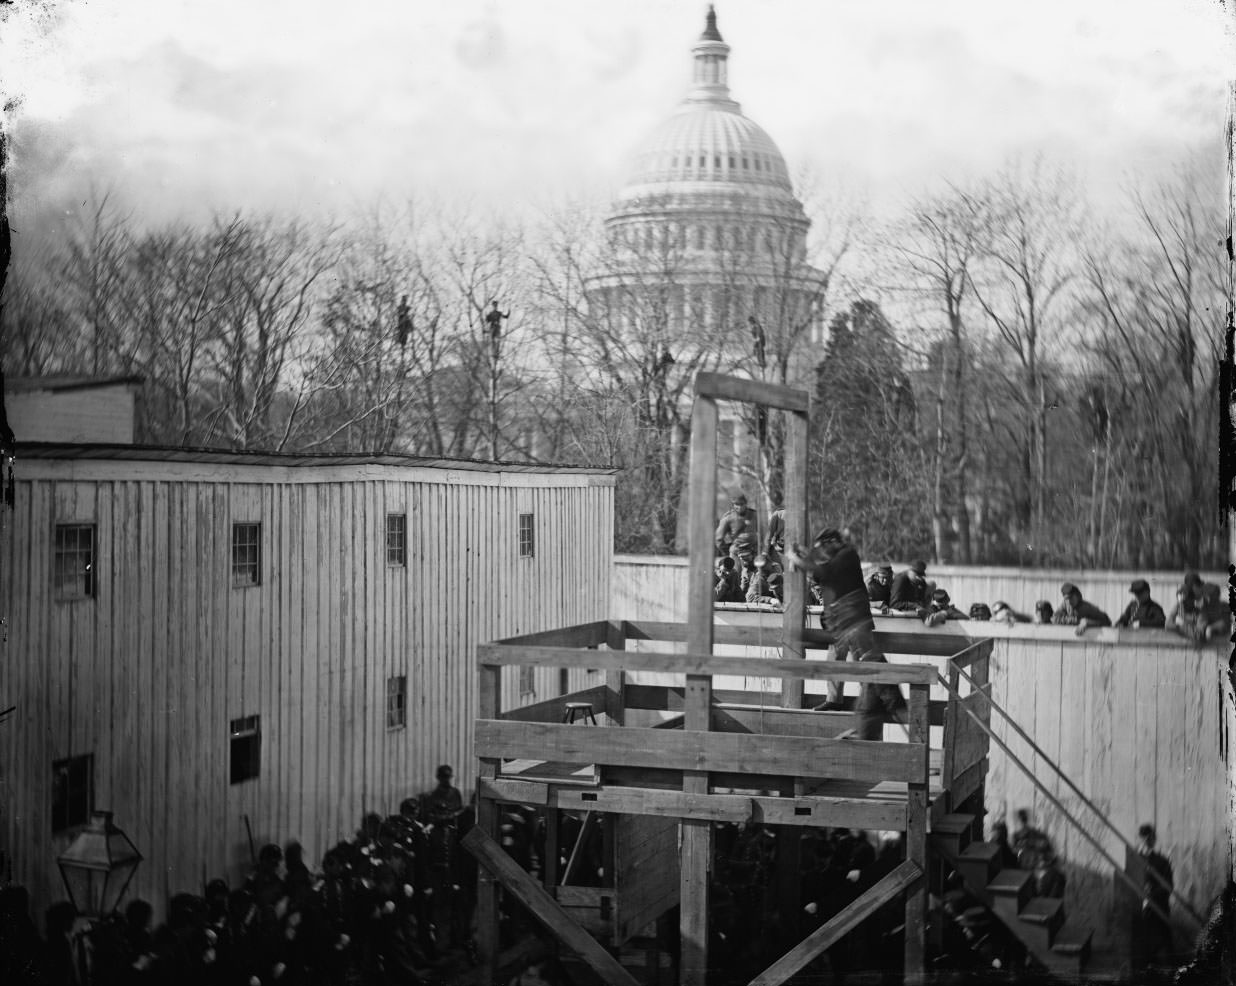 Washington, D.C. Soldier springing the trap; men in trees and Capitol dome beyond, 1865